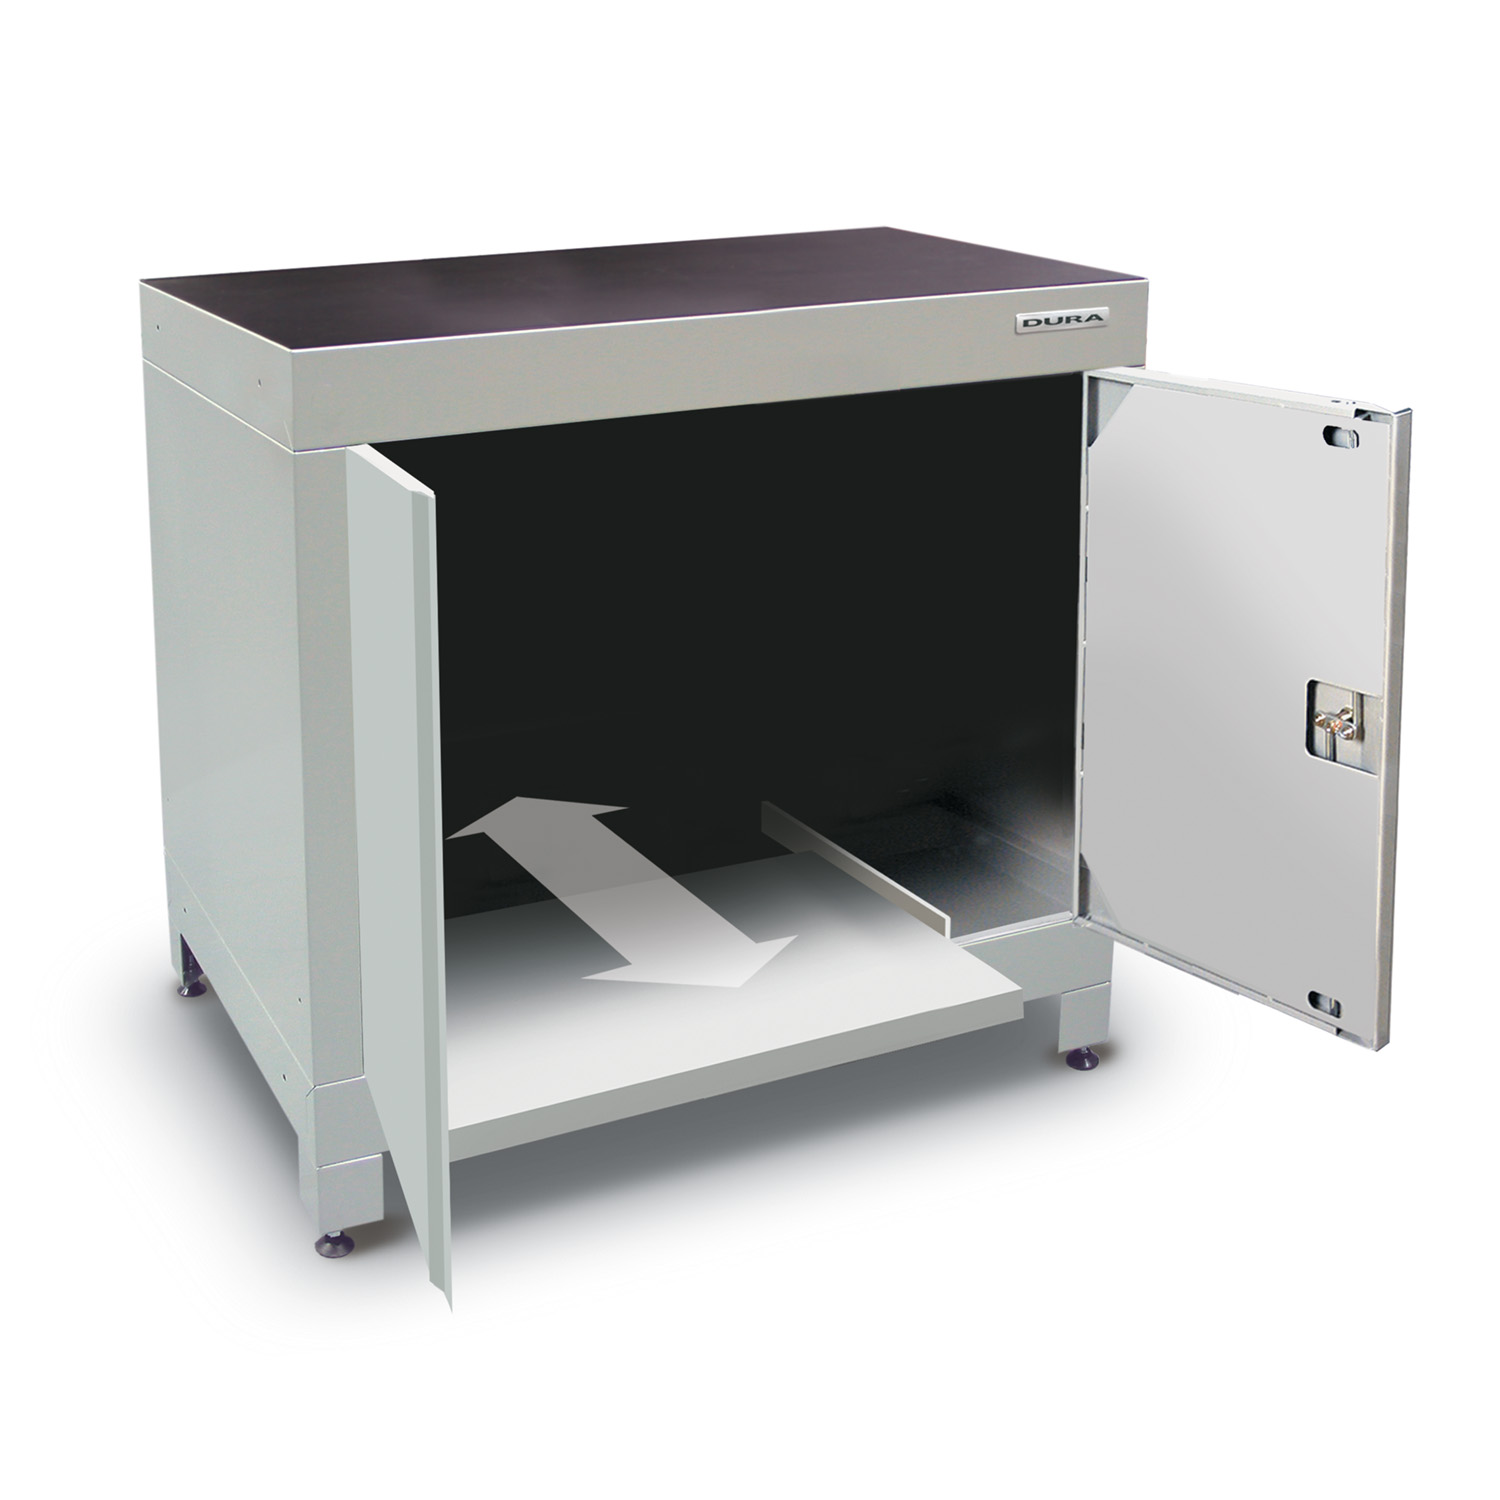 900mm computer cabinet (with doors, sliding shelf and feet)